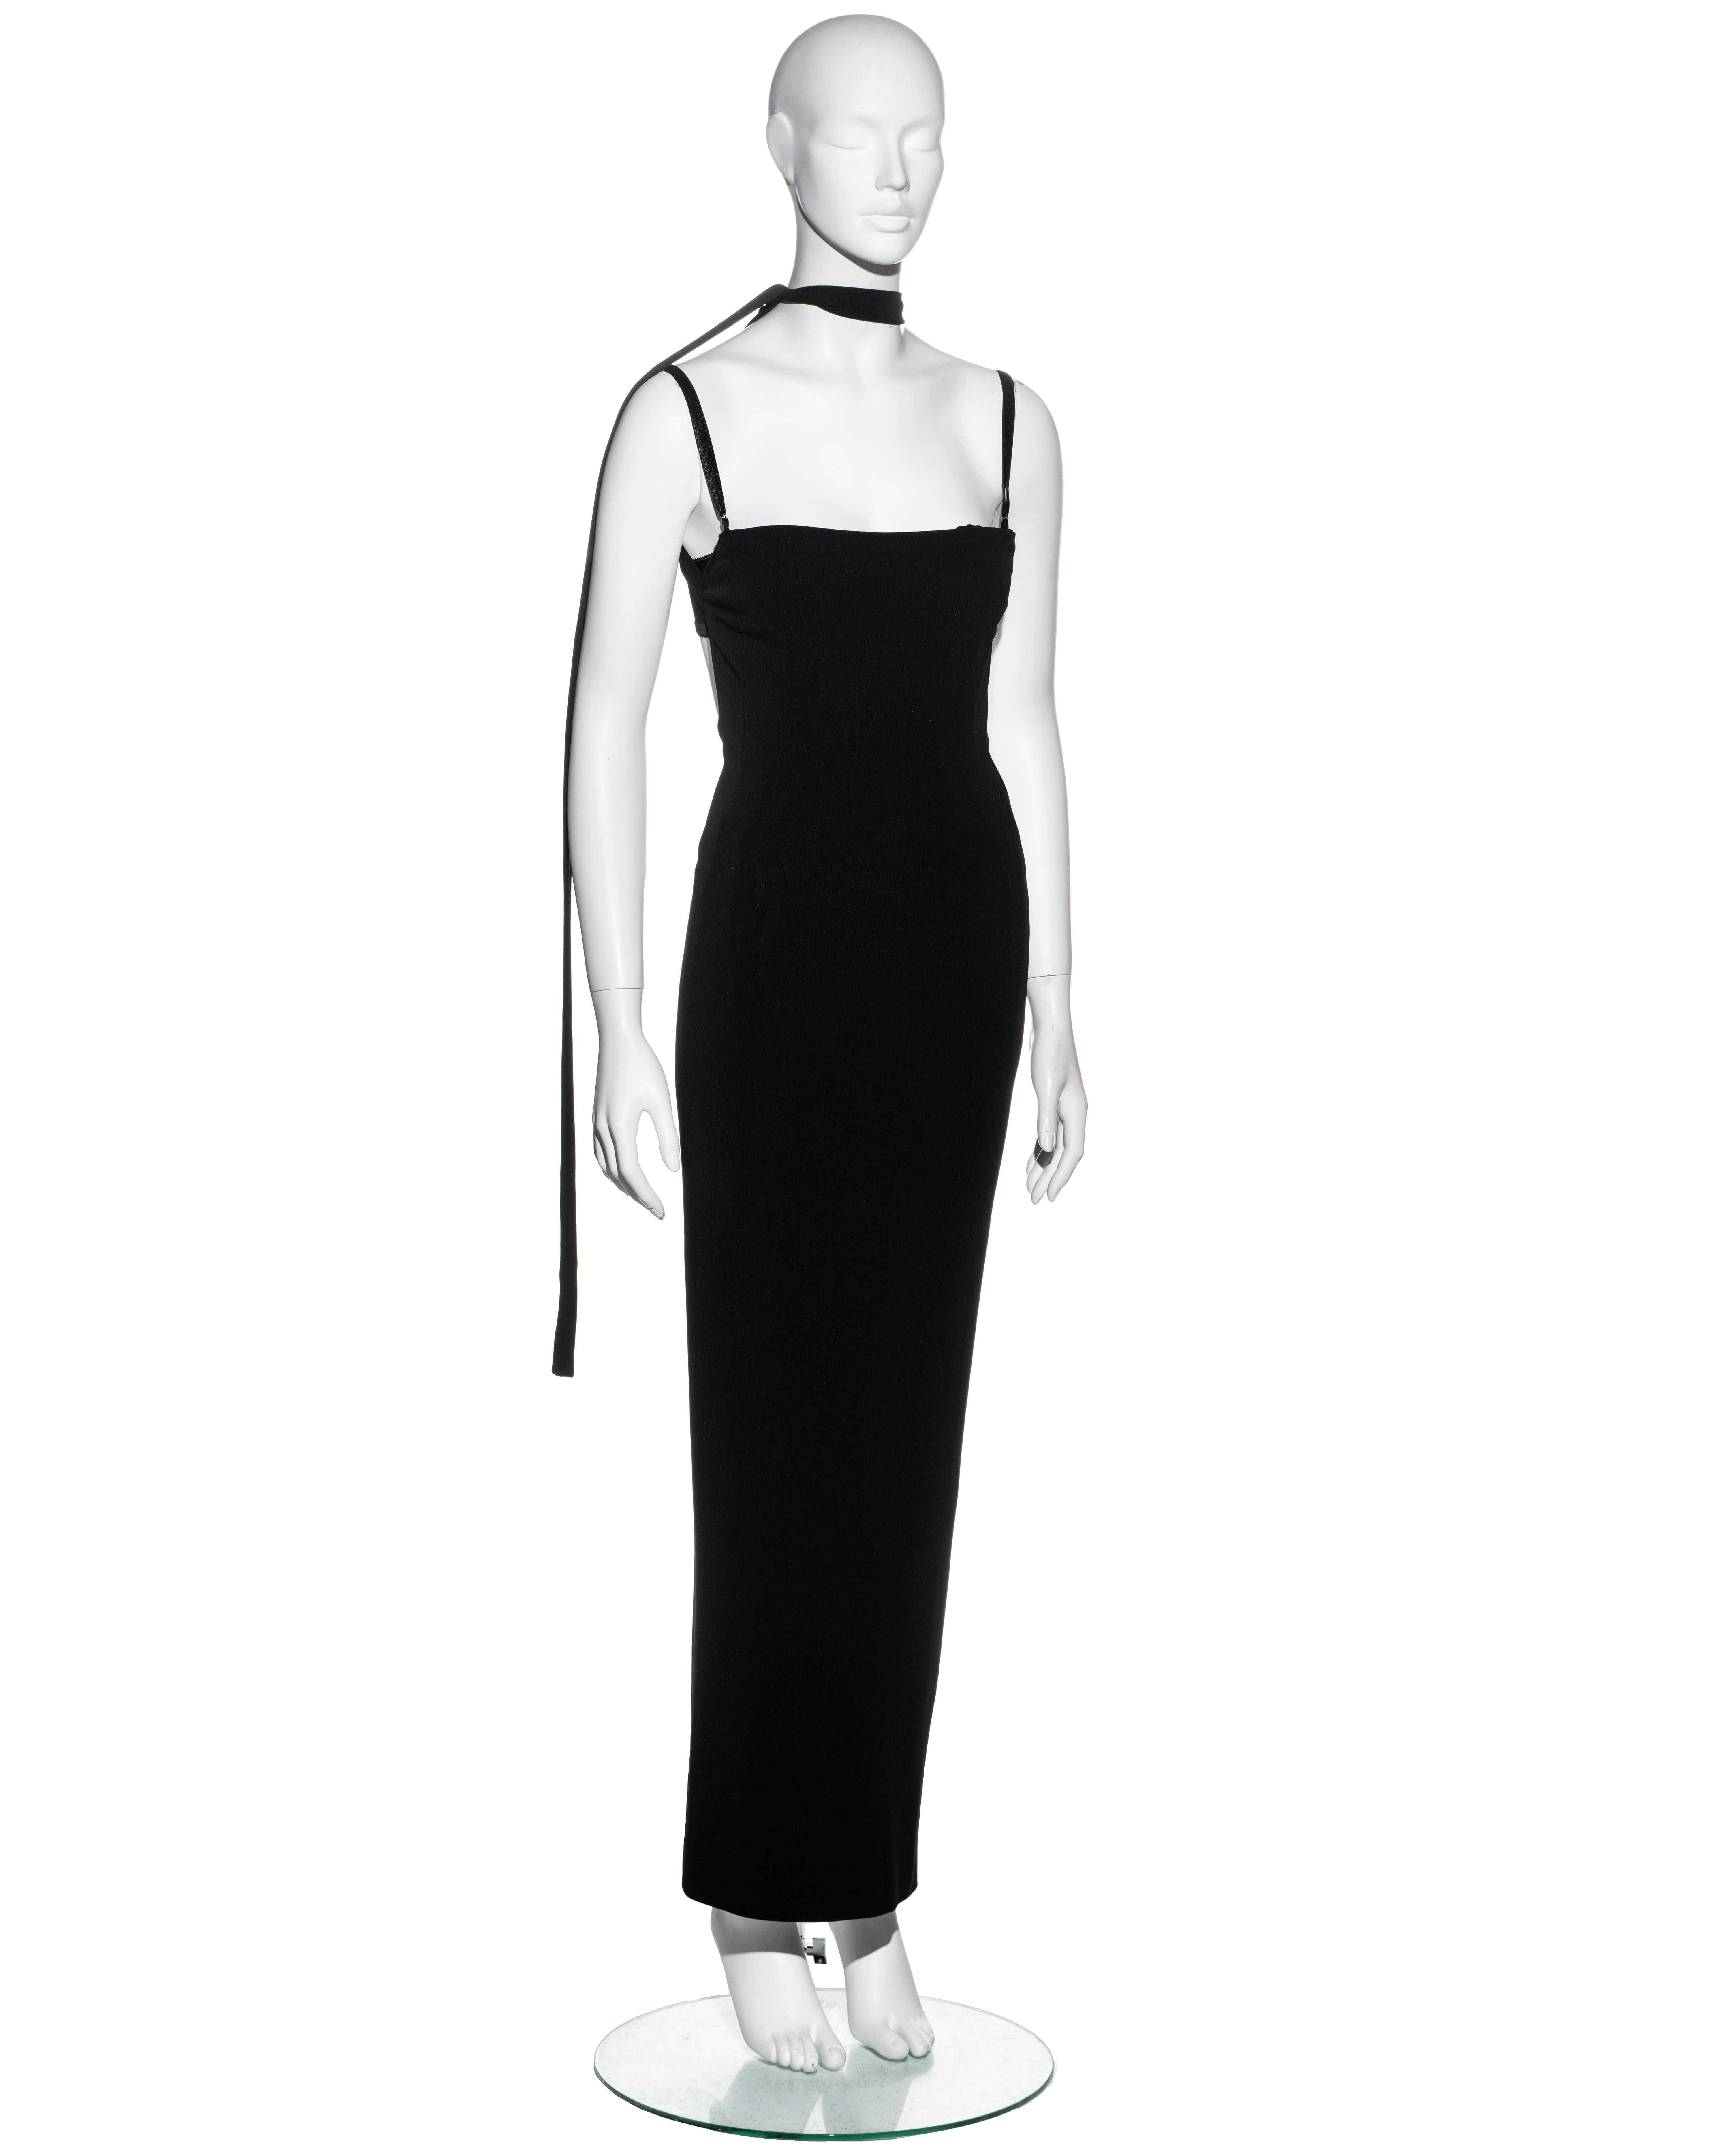 ▪ Dolce & Gabbana black maxi dress 
▪ 75% Rayon, 17% Nylon, 8% Spandex 
▪ Built-in bra 
▪ Open back 
▪ Two criss-cross bandage straps at back fastening at the neck 
▪ Size Small
▪ Spring-Summer 2001